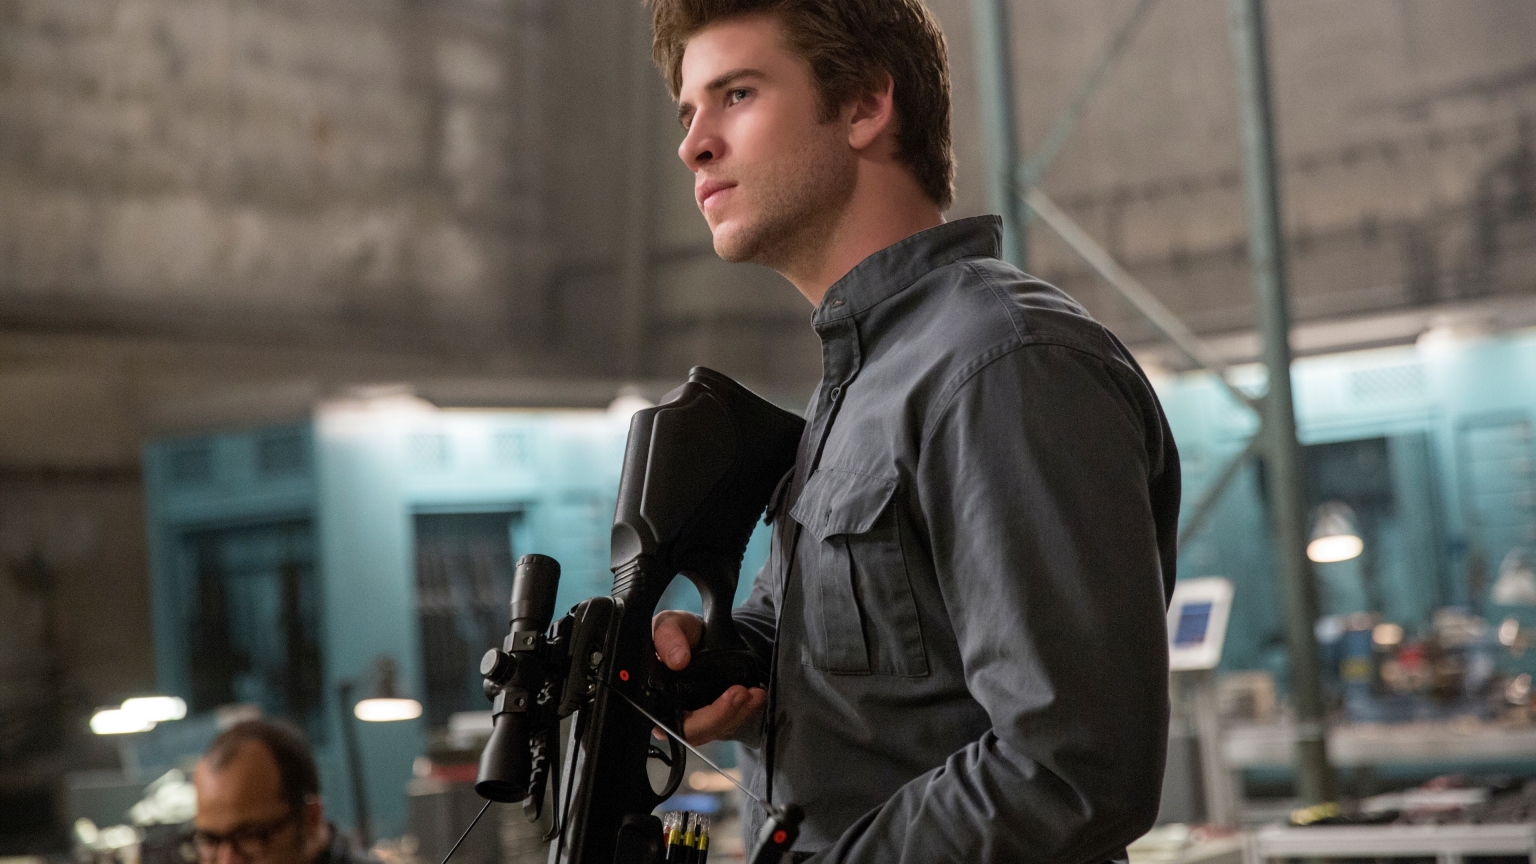 Liam Hemsworth in The Hunger Games for 1536 x 864 HDTV resolution